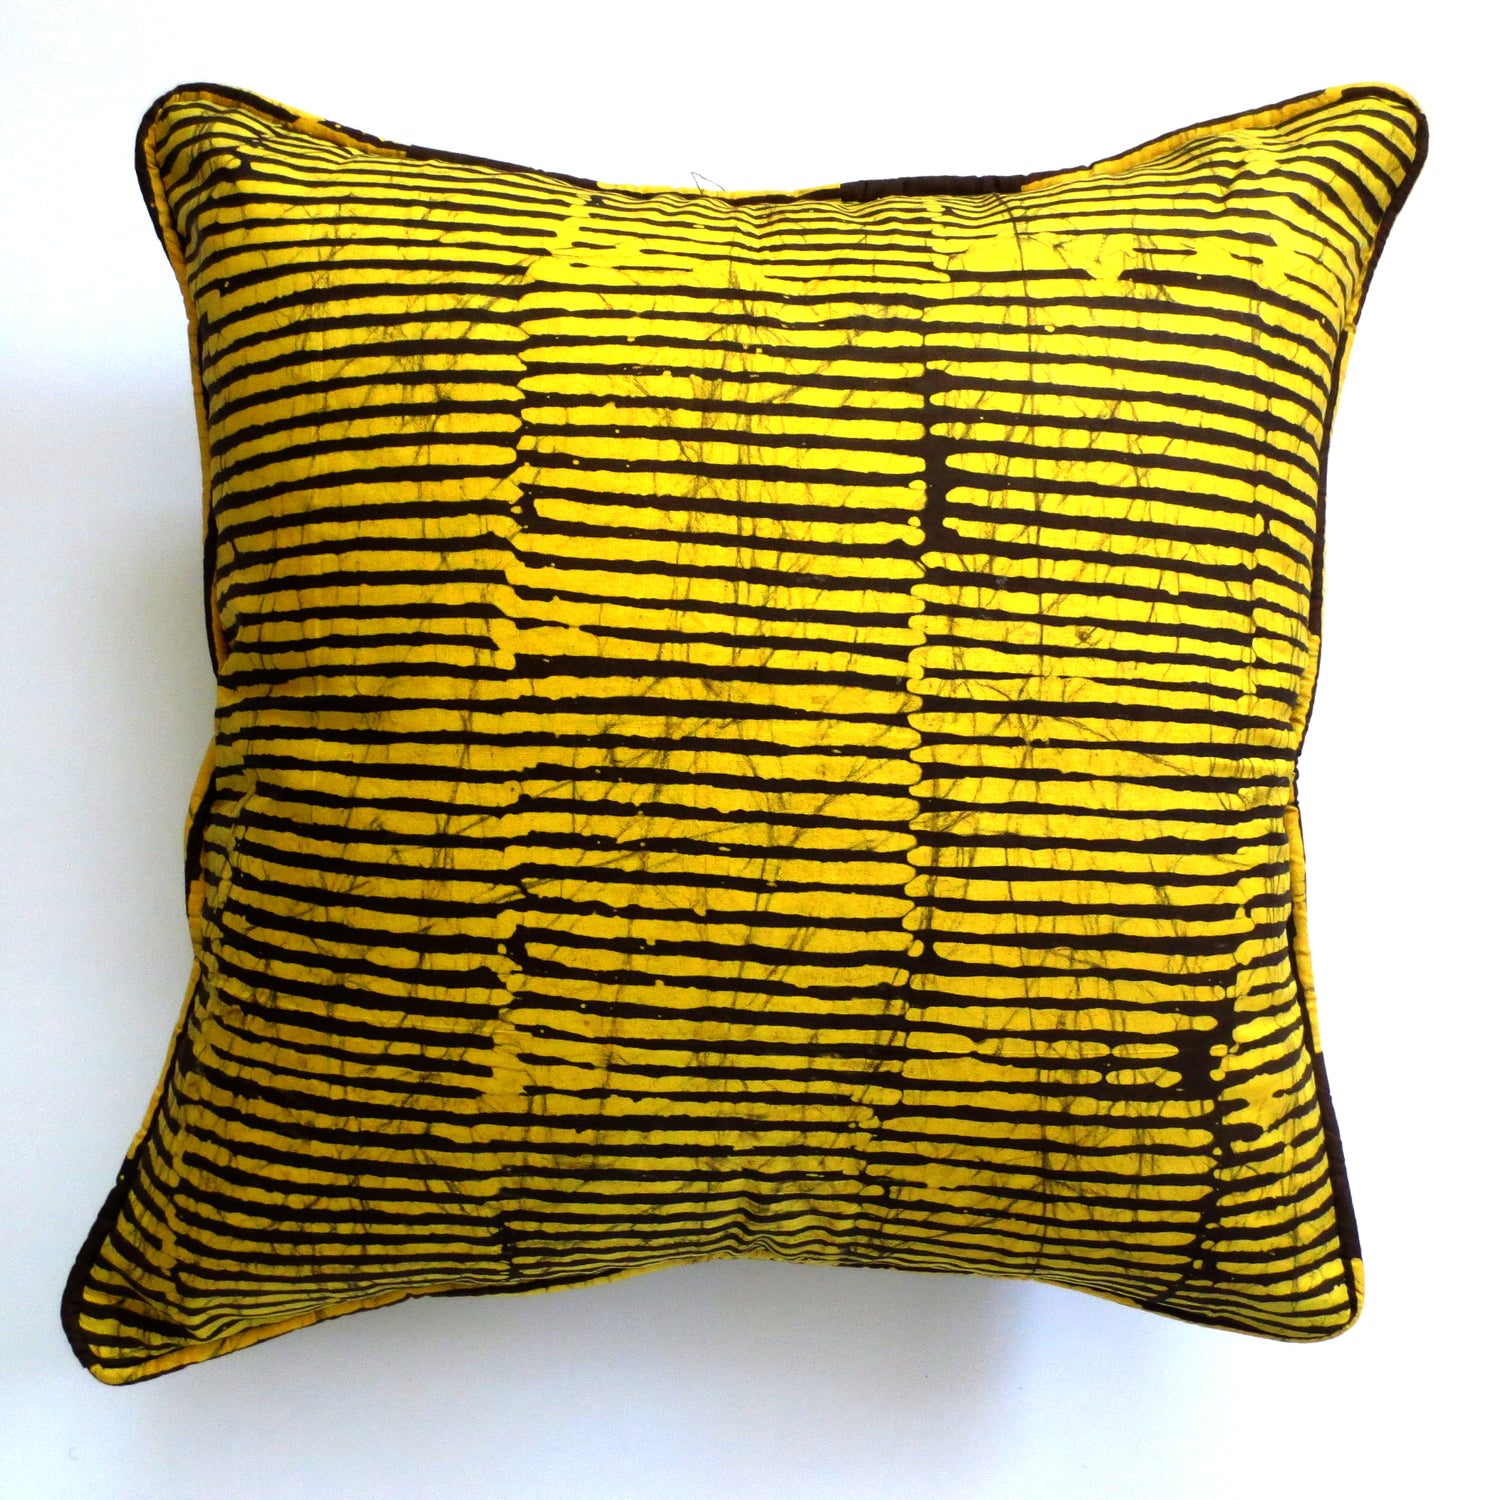 20"x20" pillow cover yellow brown